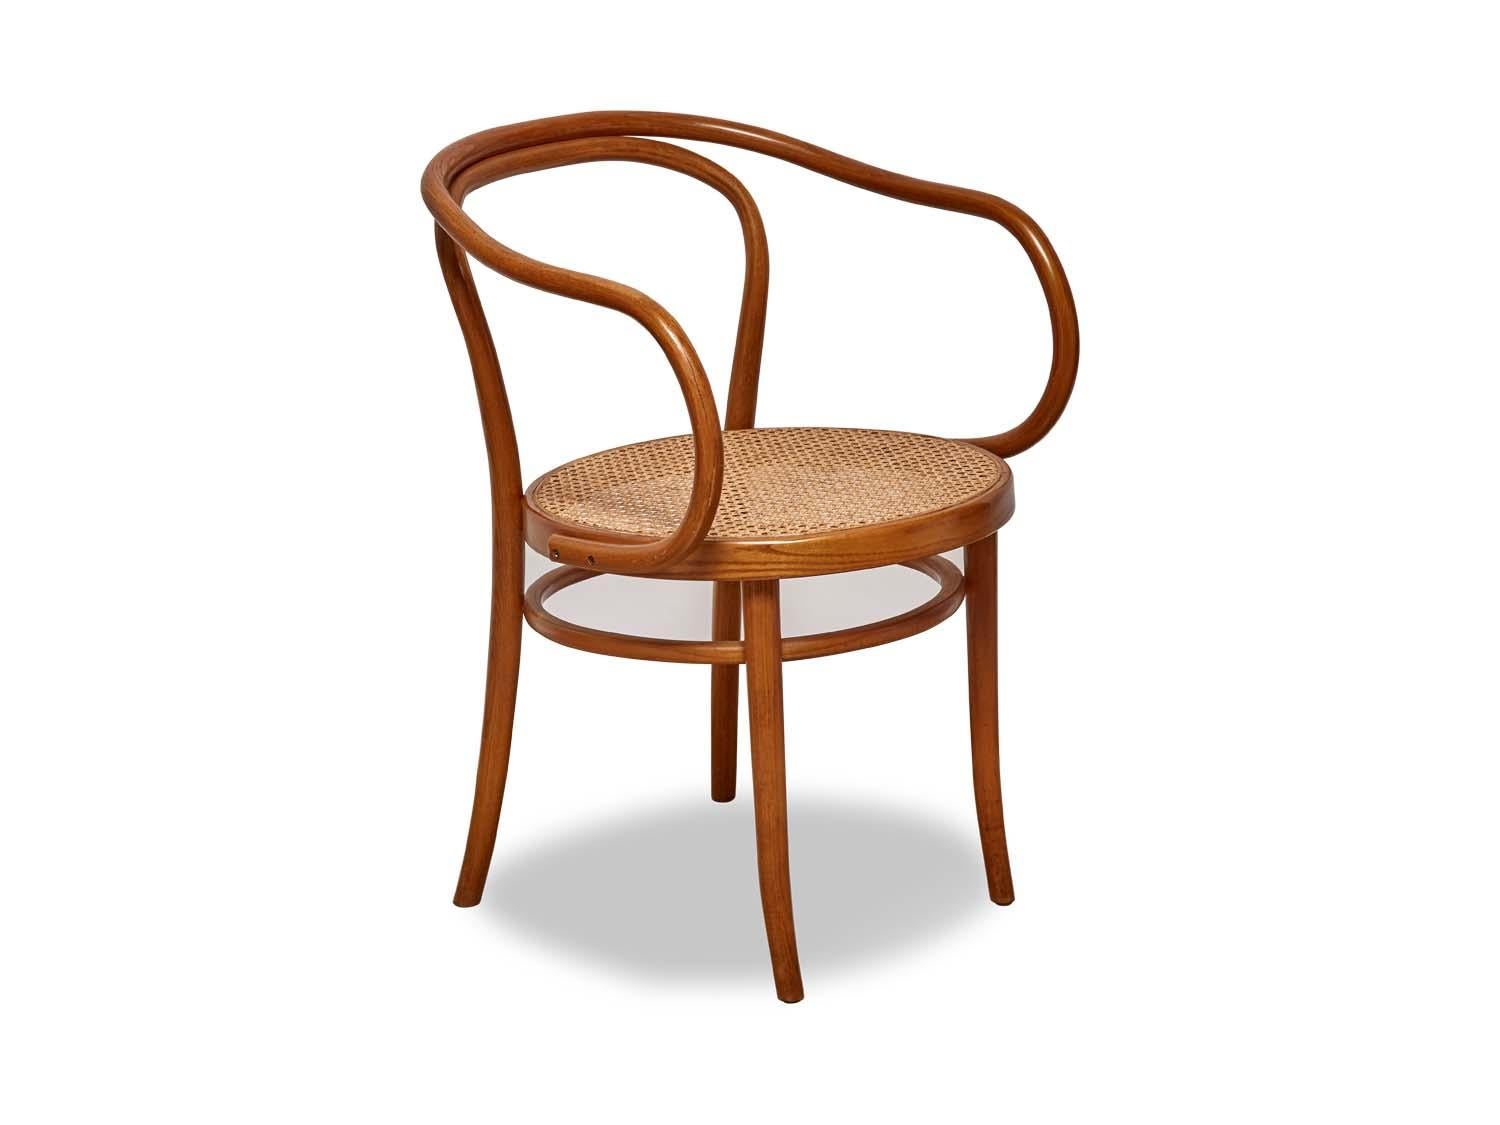 stendig bentwood chairs